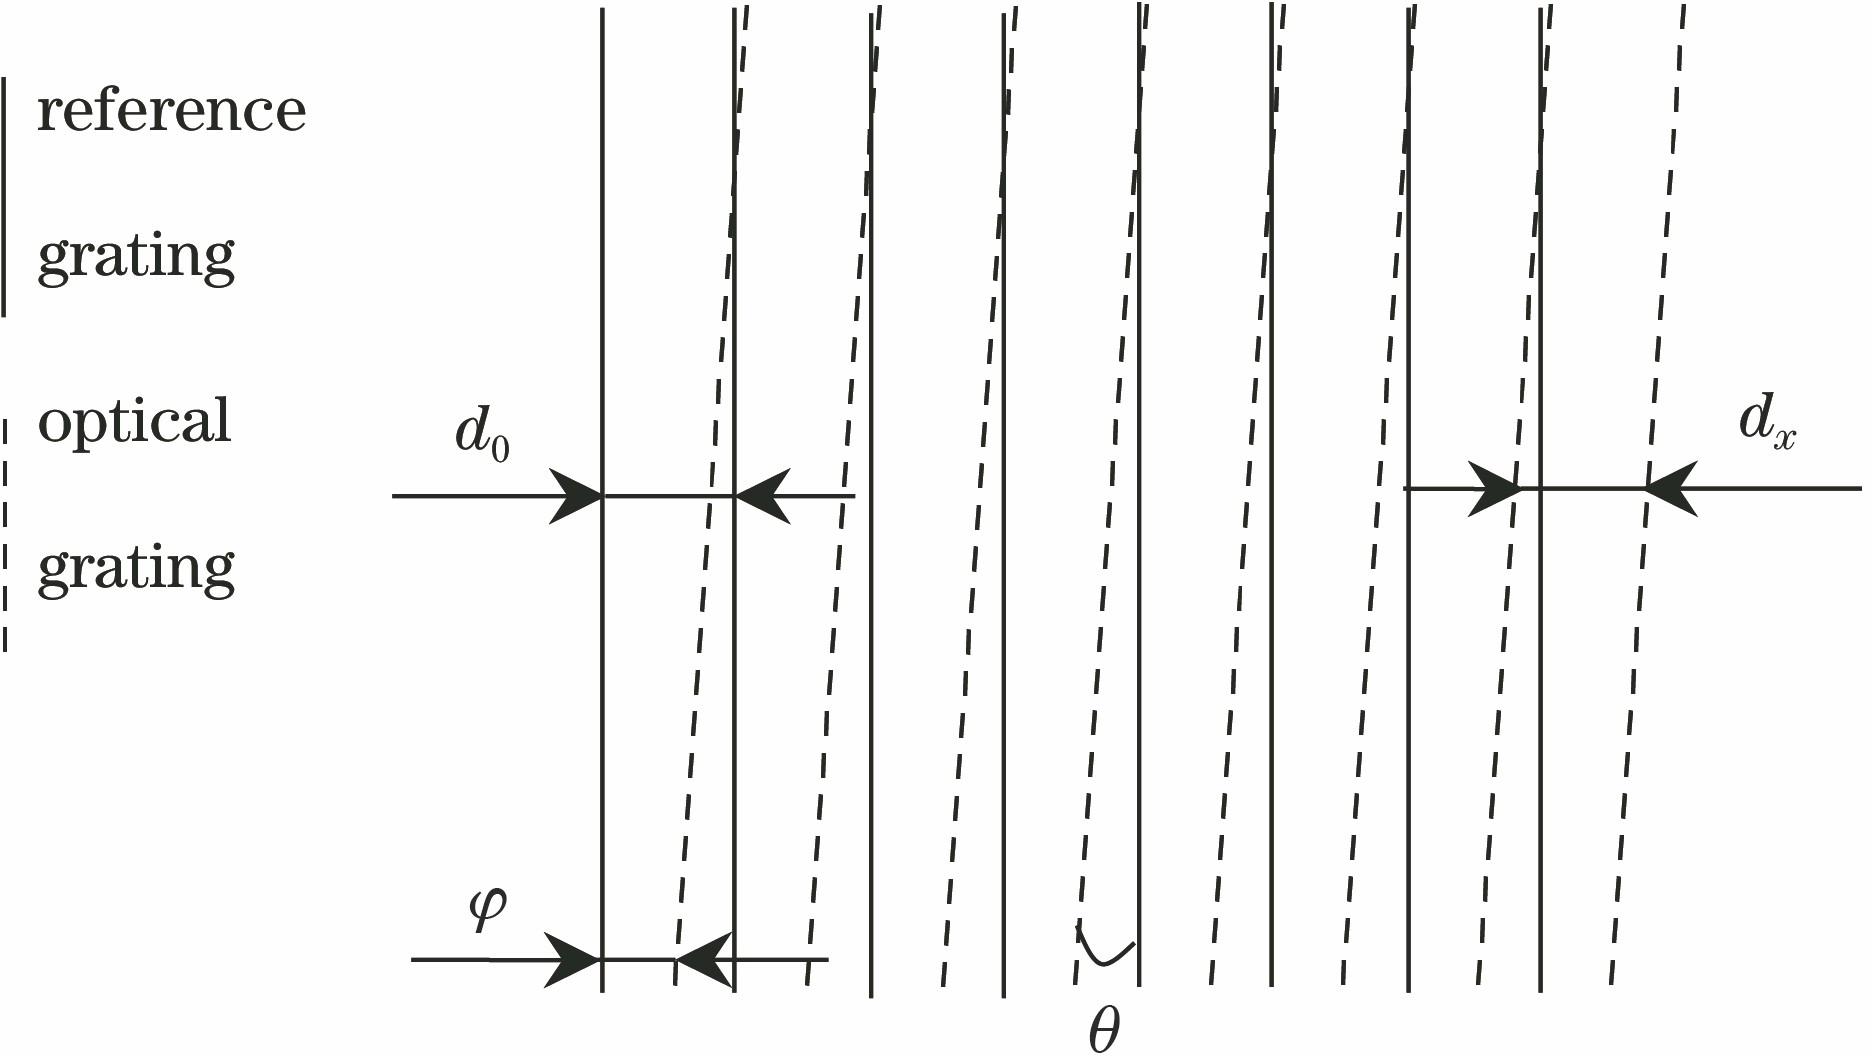 Relative position of reference grating and optical grating